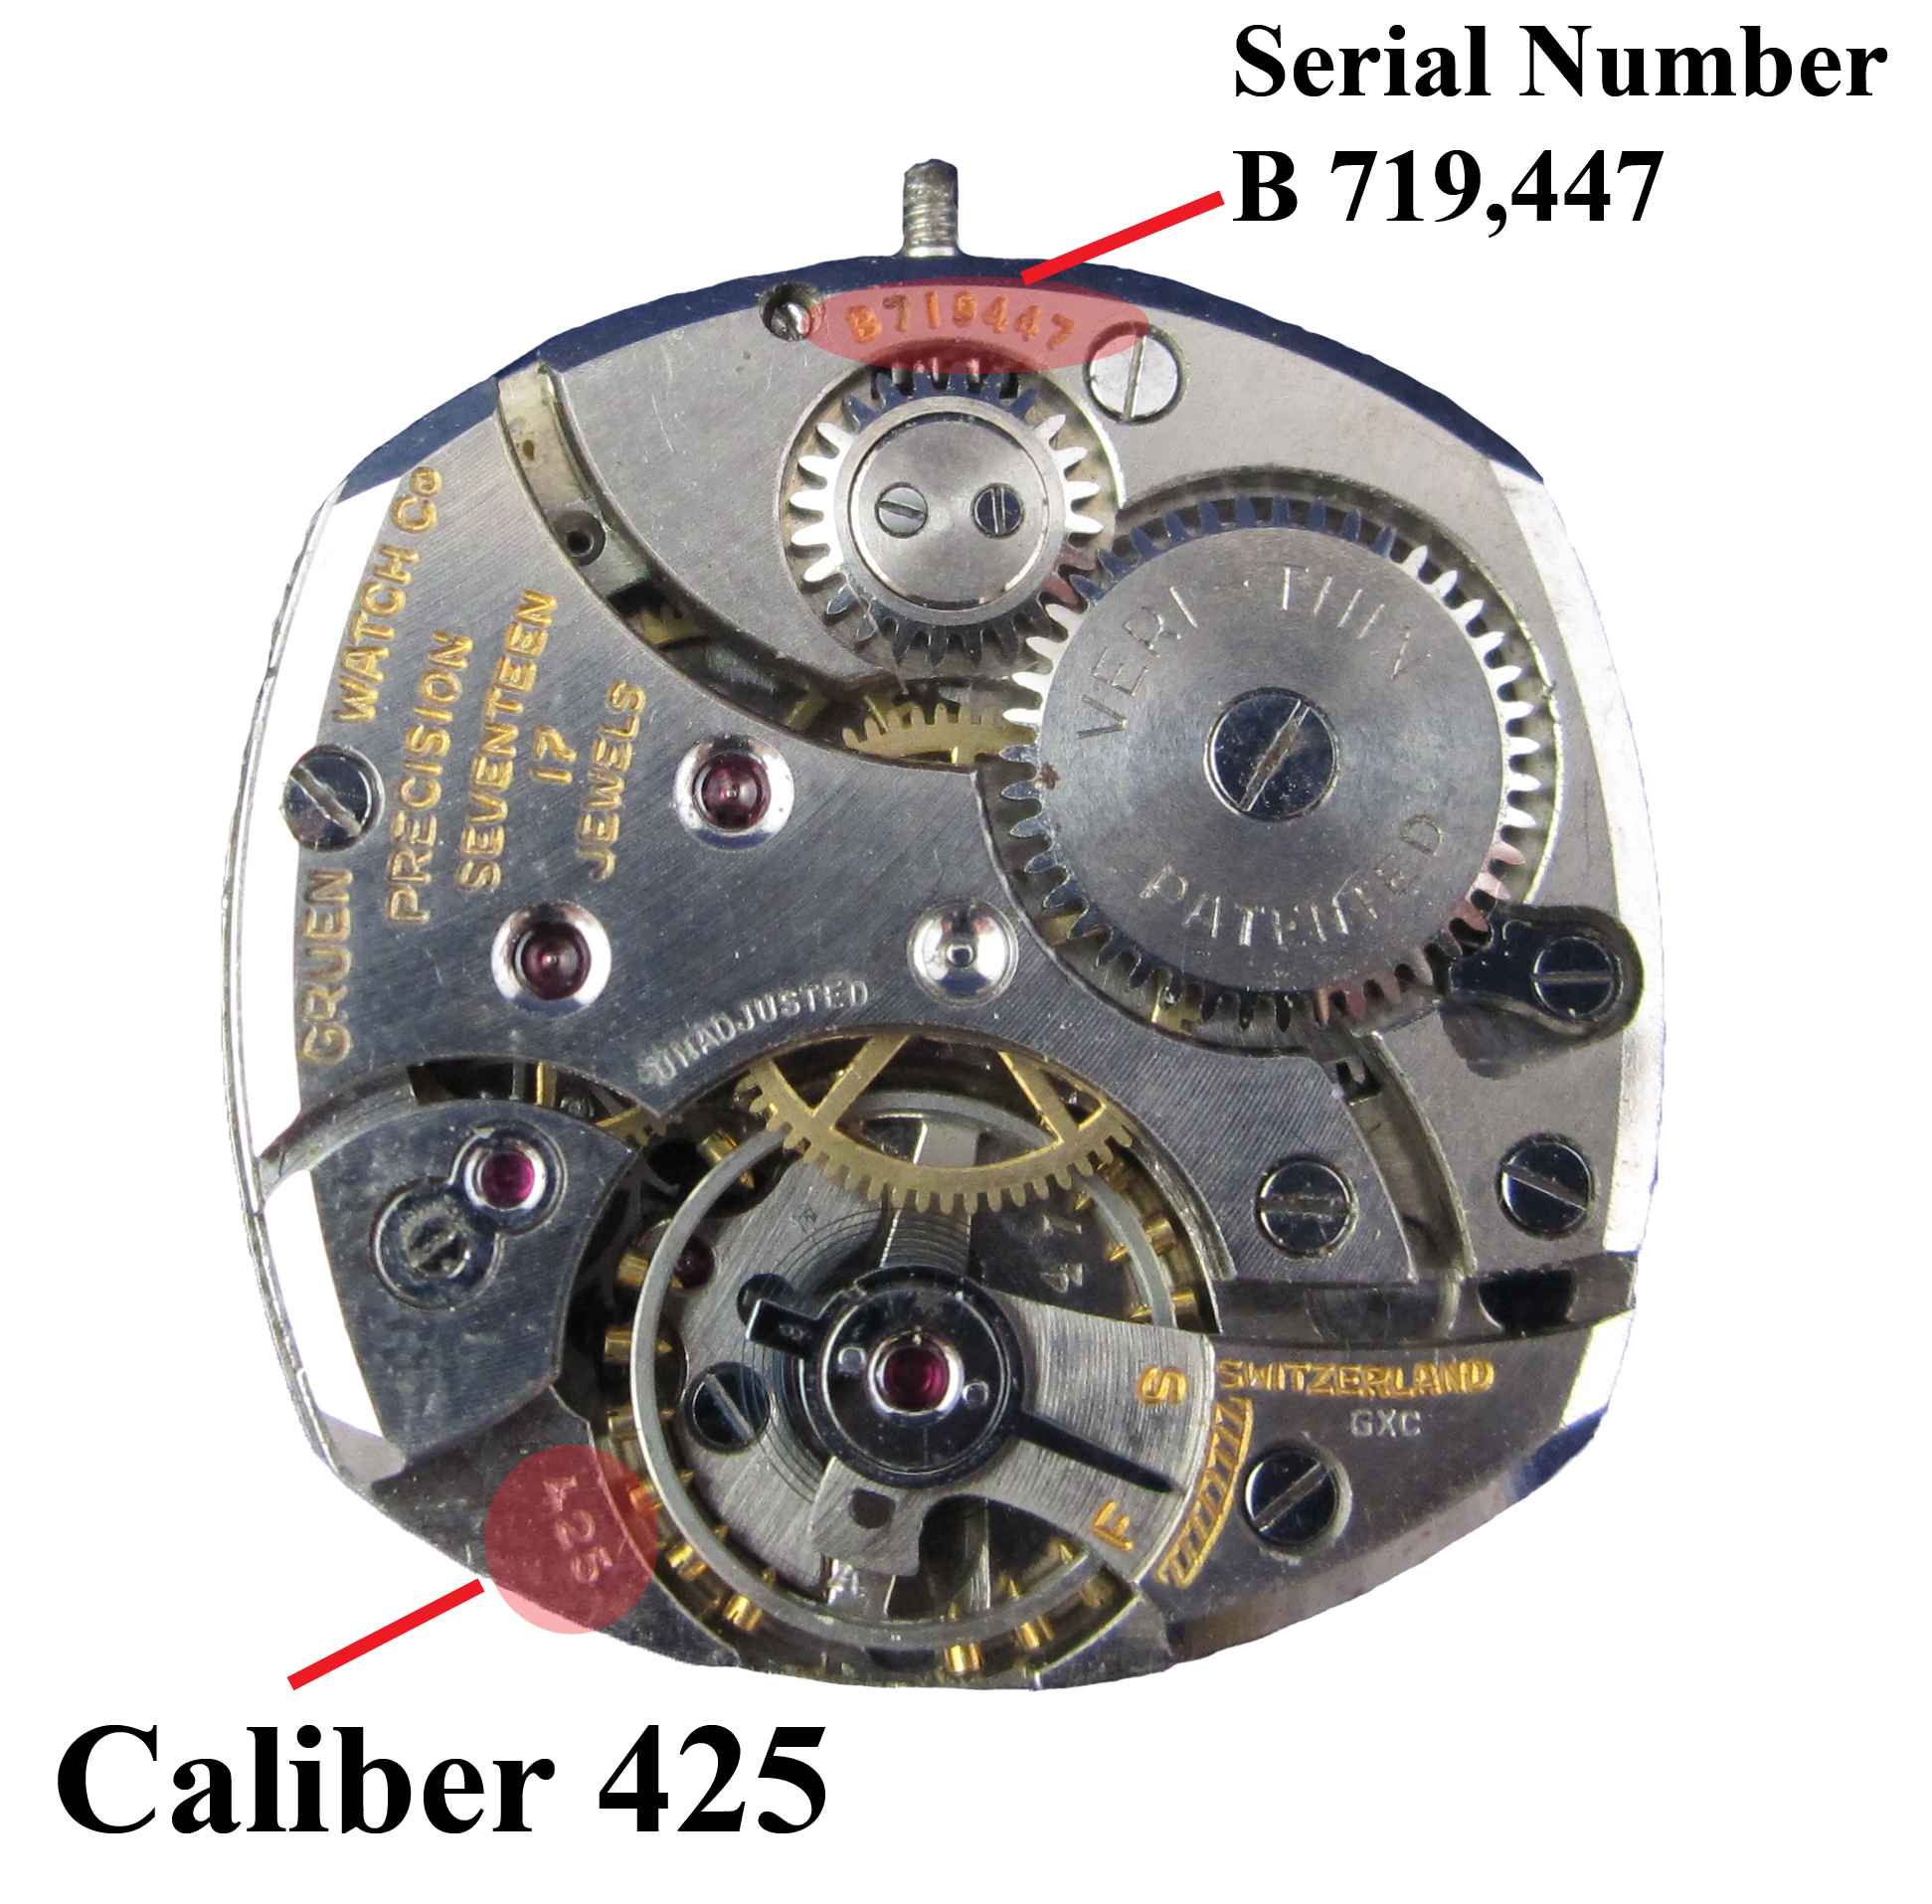 Location of serial number on Gruen Watch movement